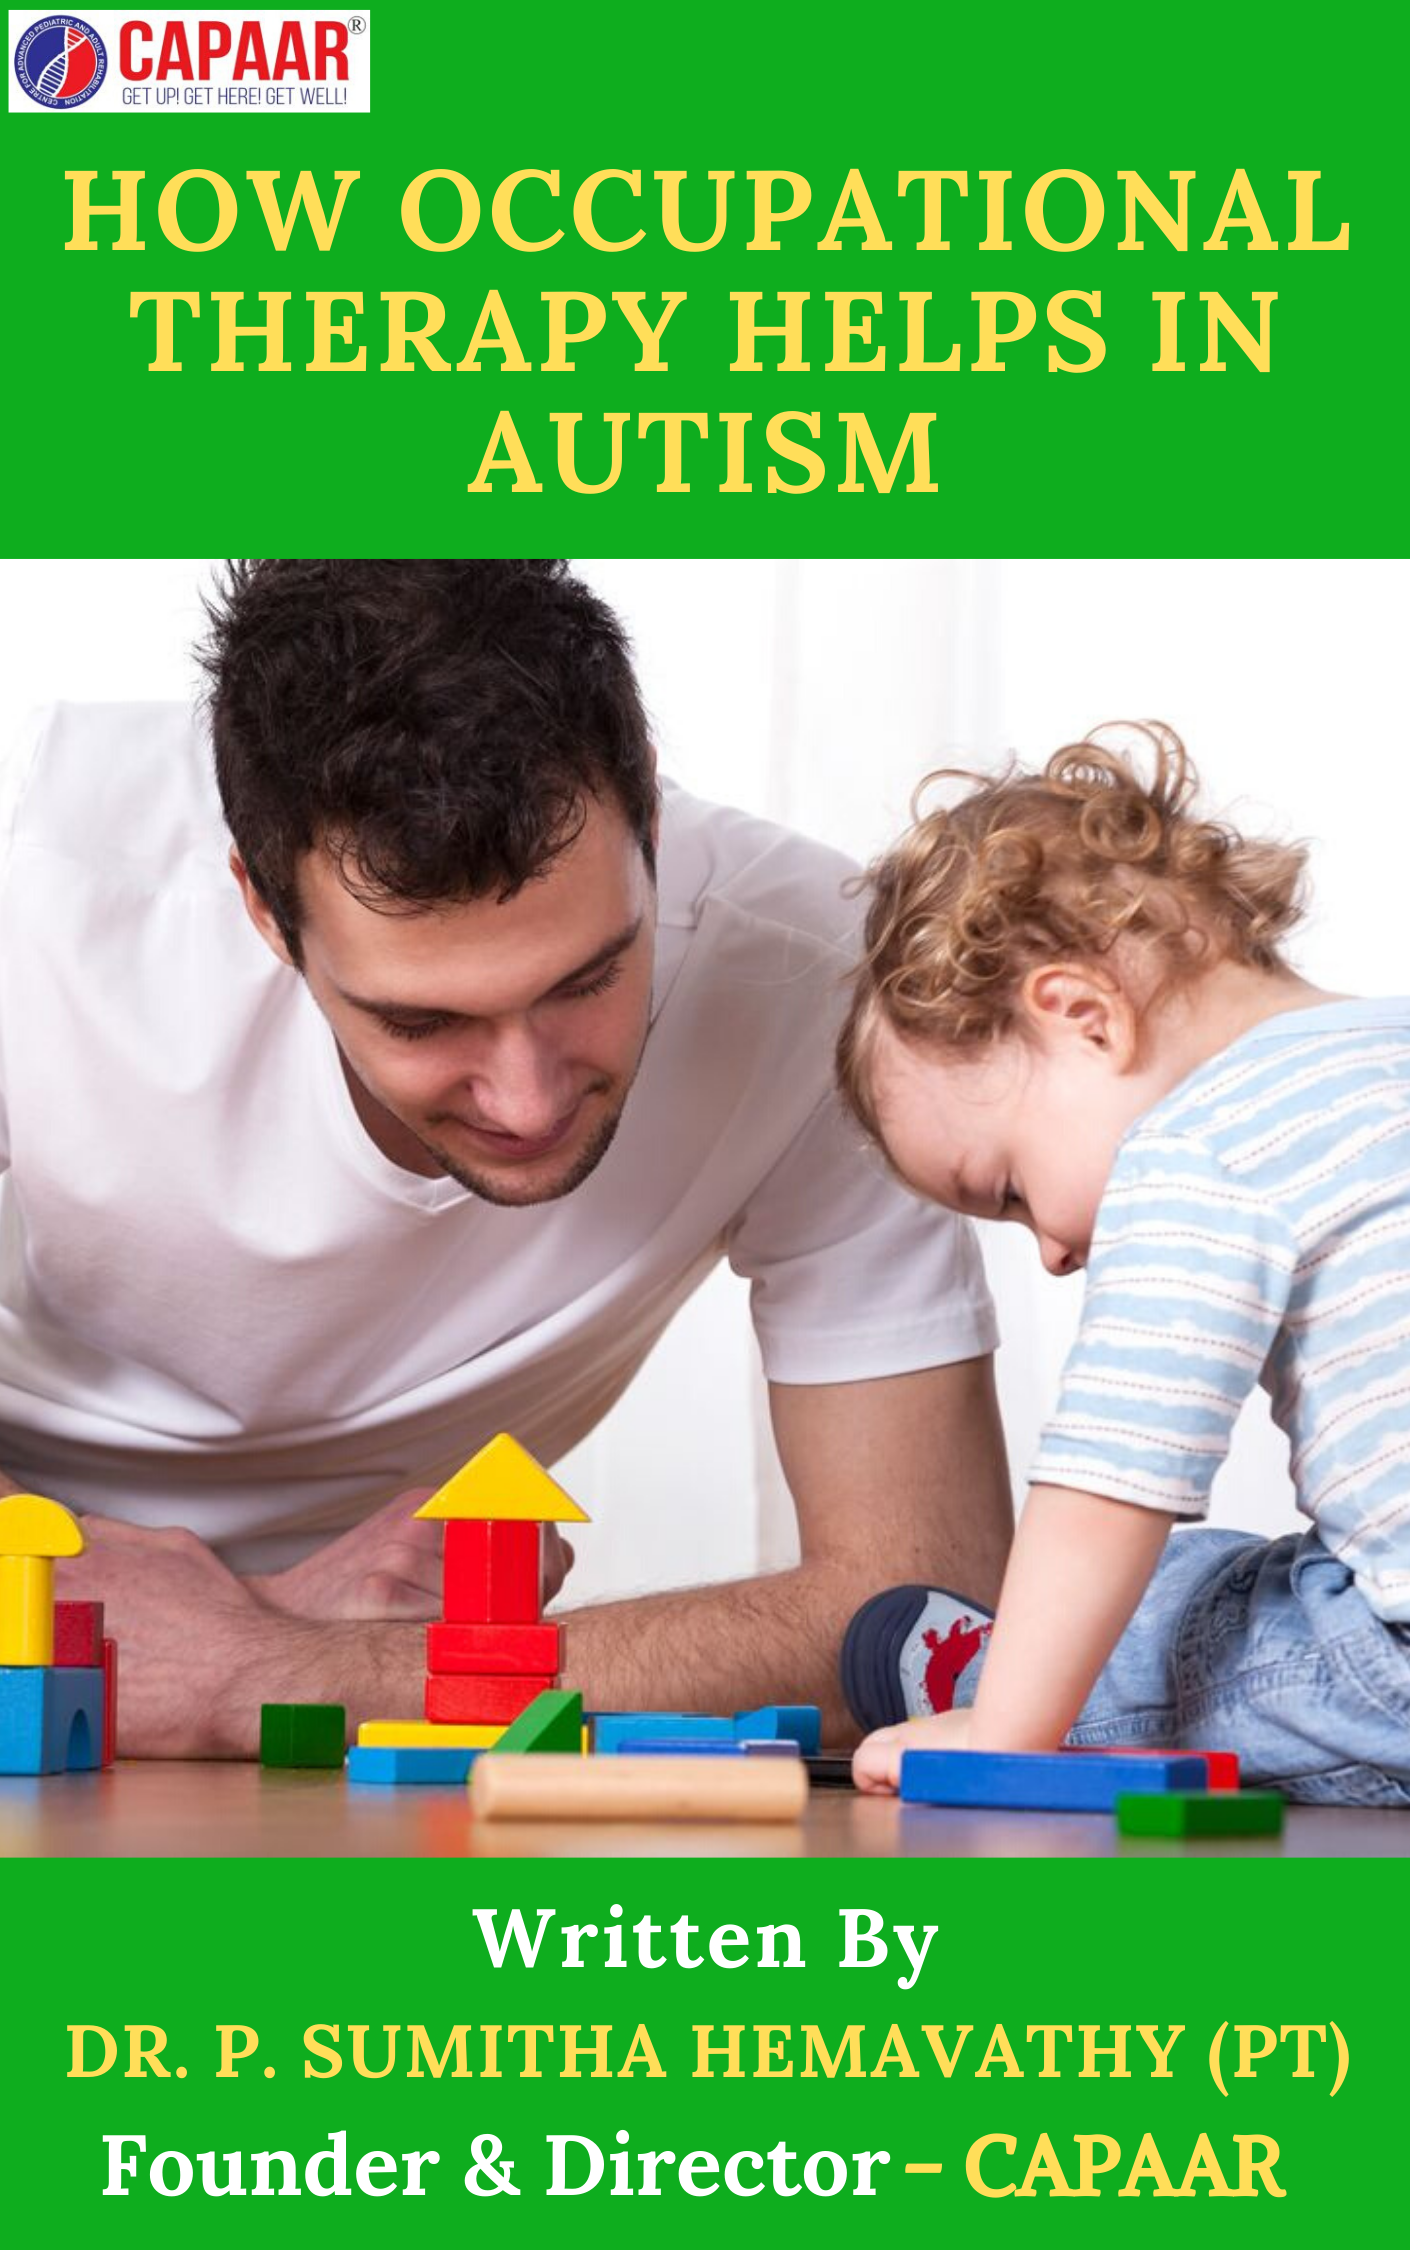 How Occupational Therapy helps in Autism